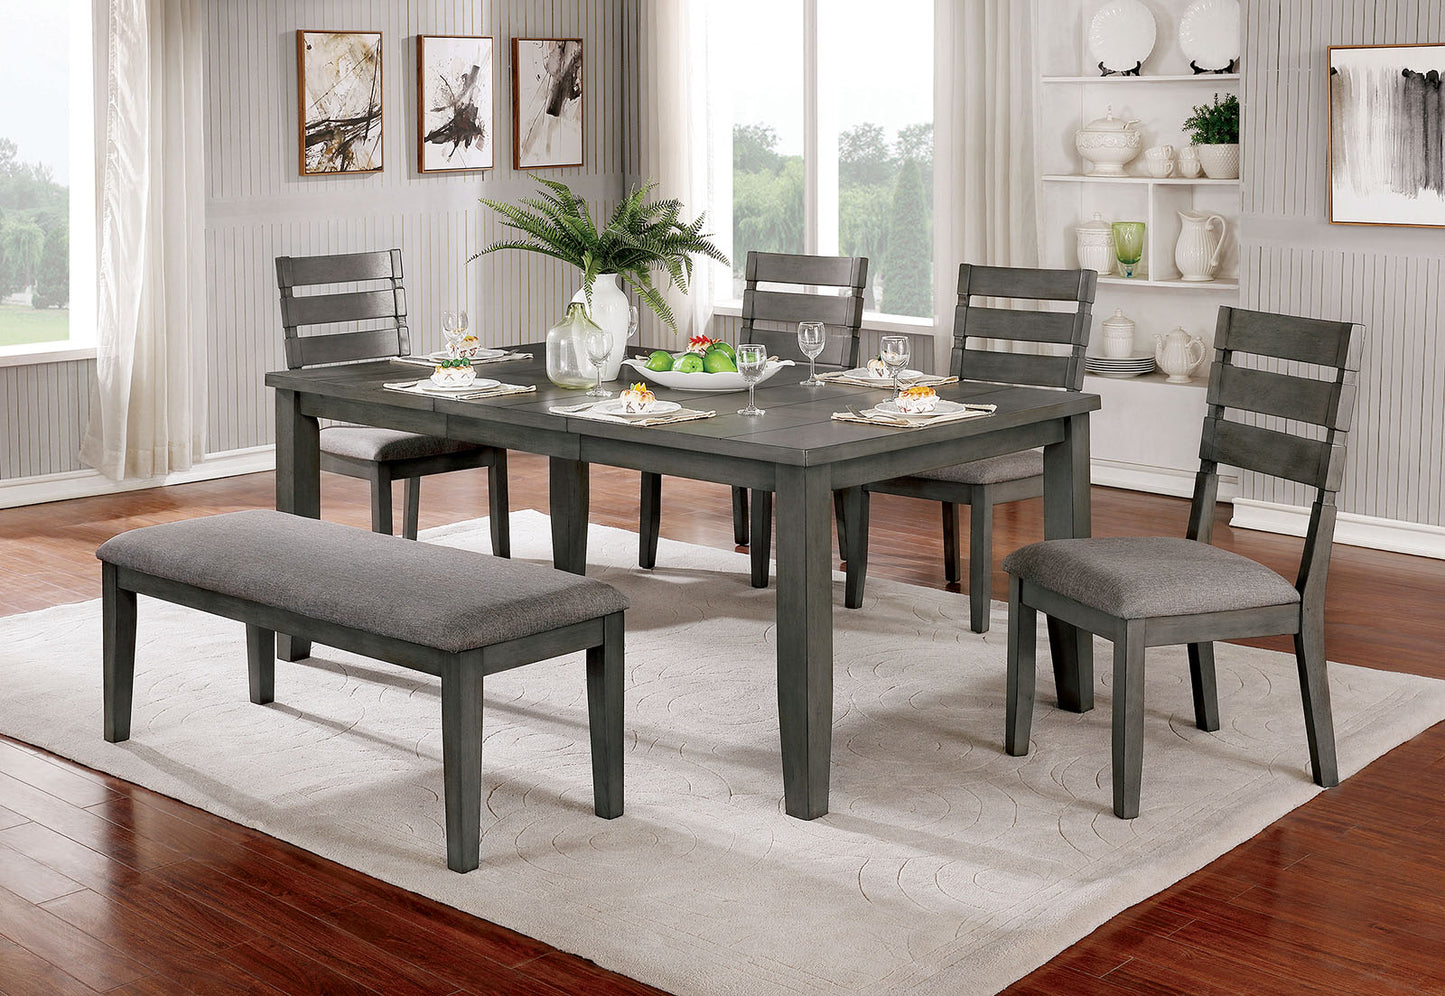 Furniture of America VIANA 6 Pc. Dining Table Set w/ Bench